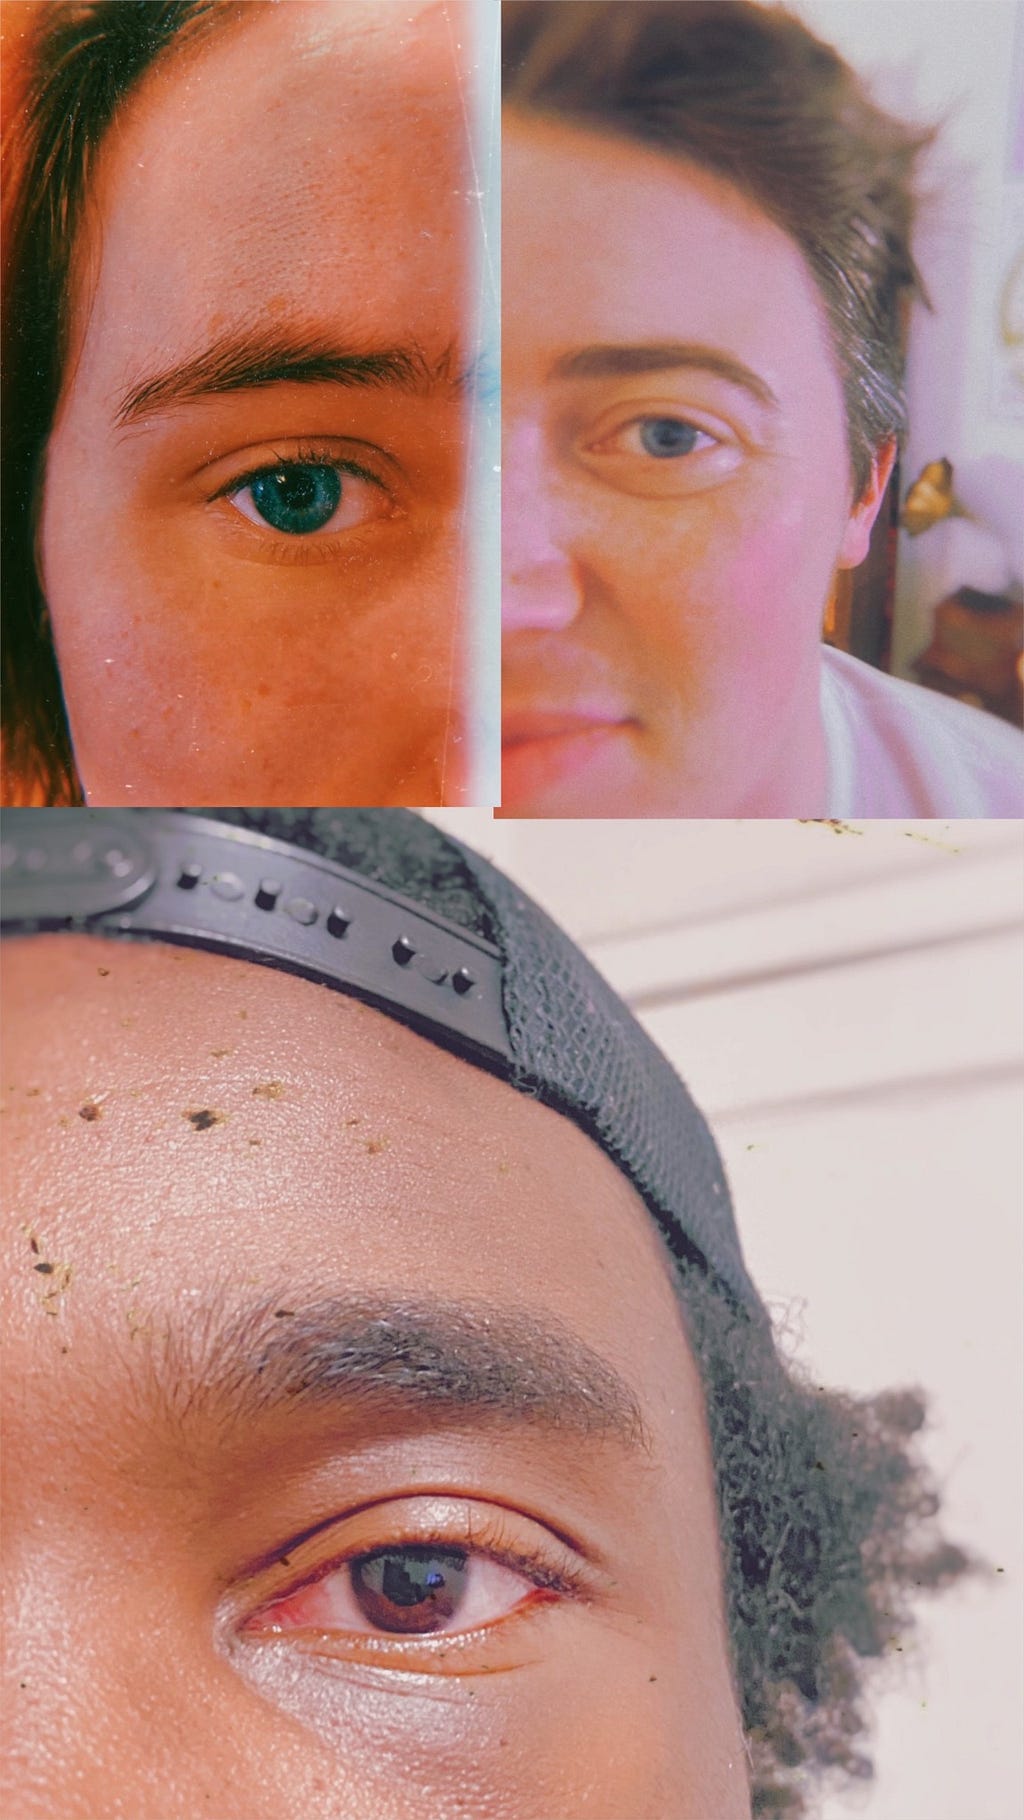 Photo collage of a close-up of three people’s eyes.